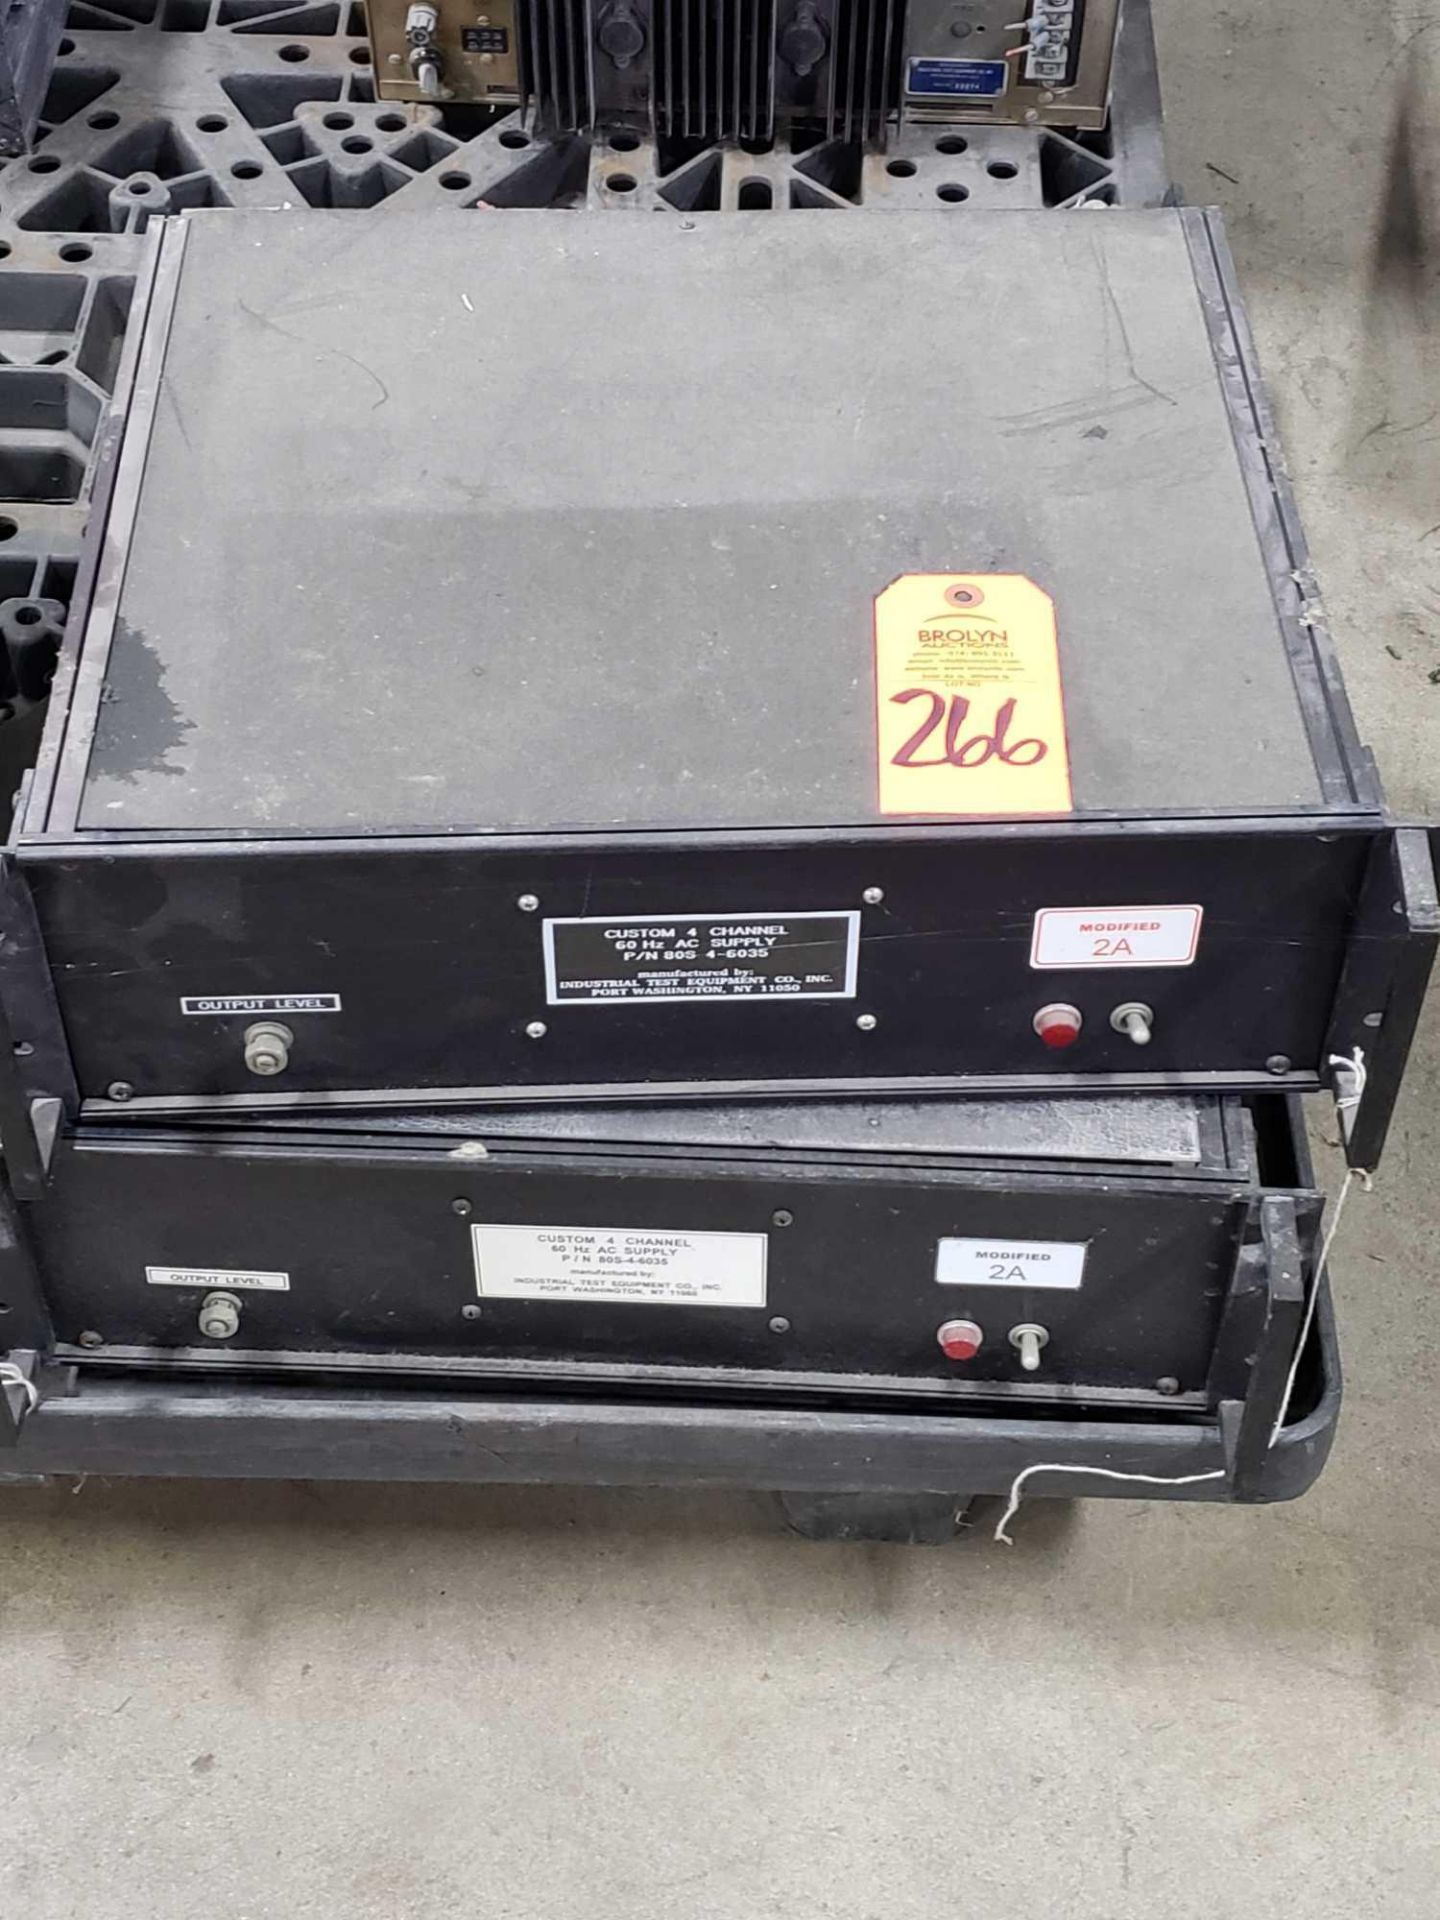 Qty 2 - Industrial Test Equipment model 80S-4-6035 power supplies.